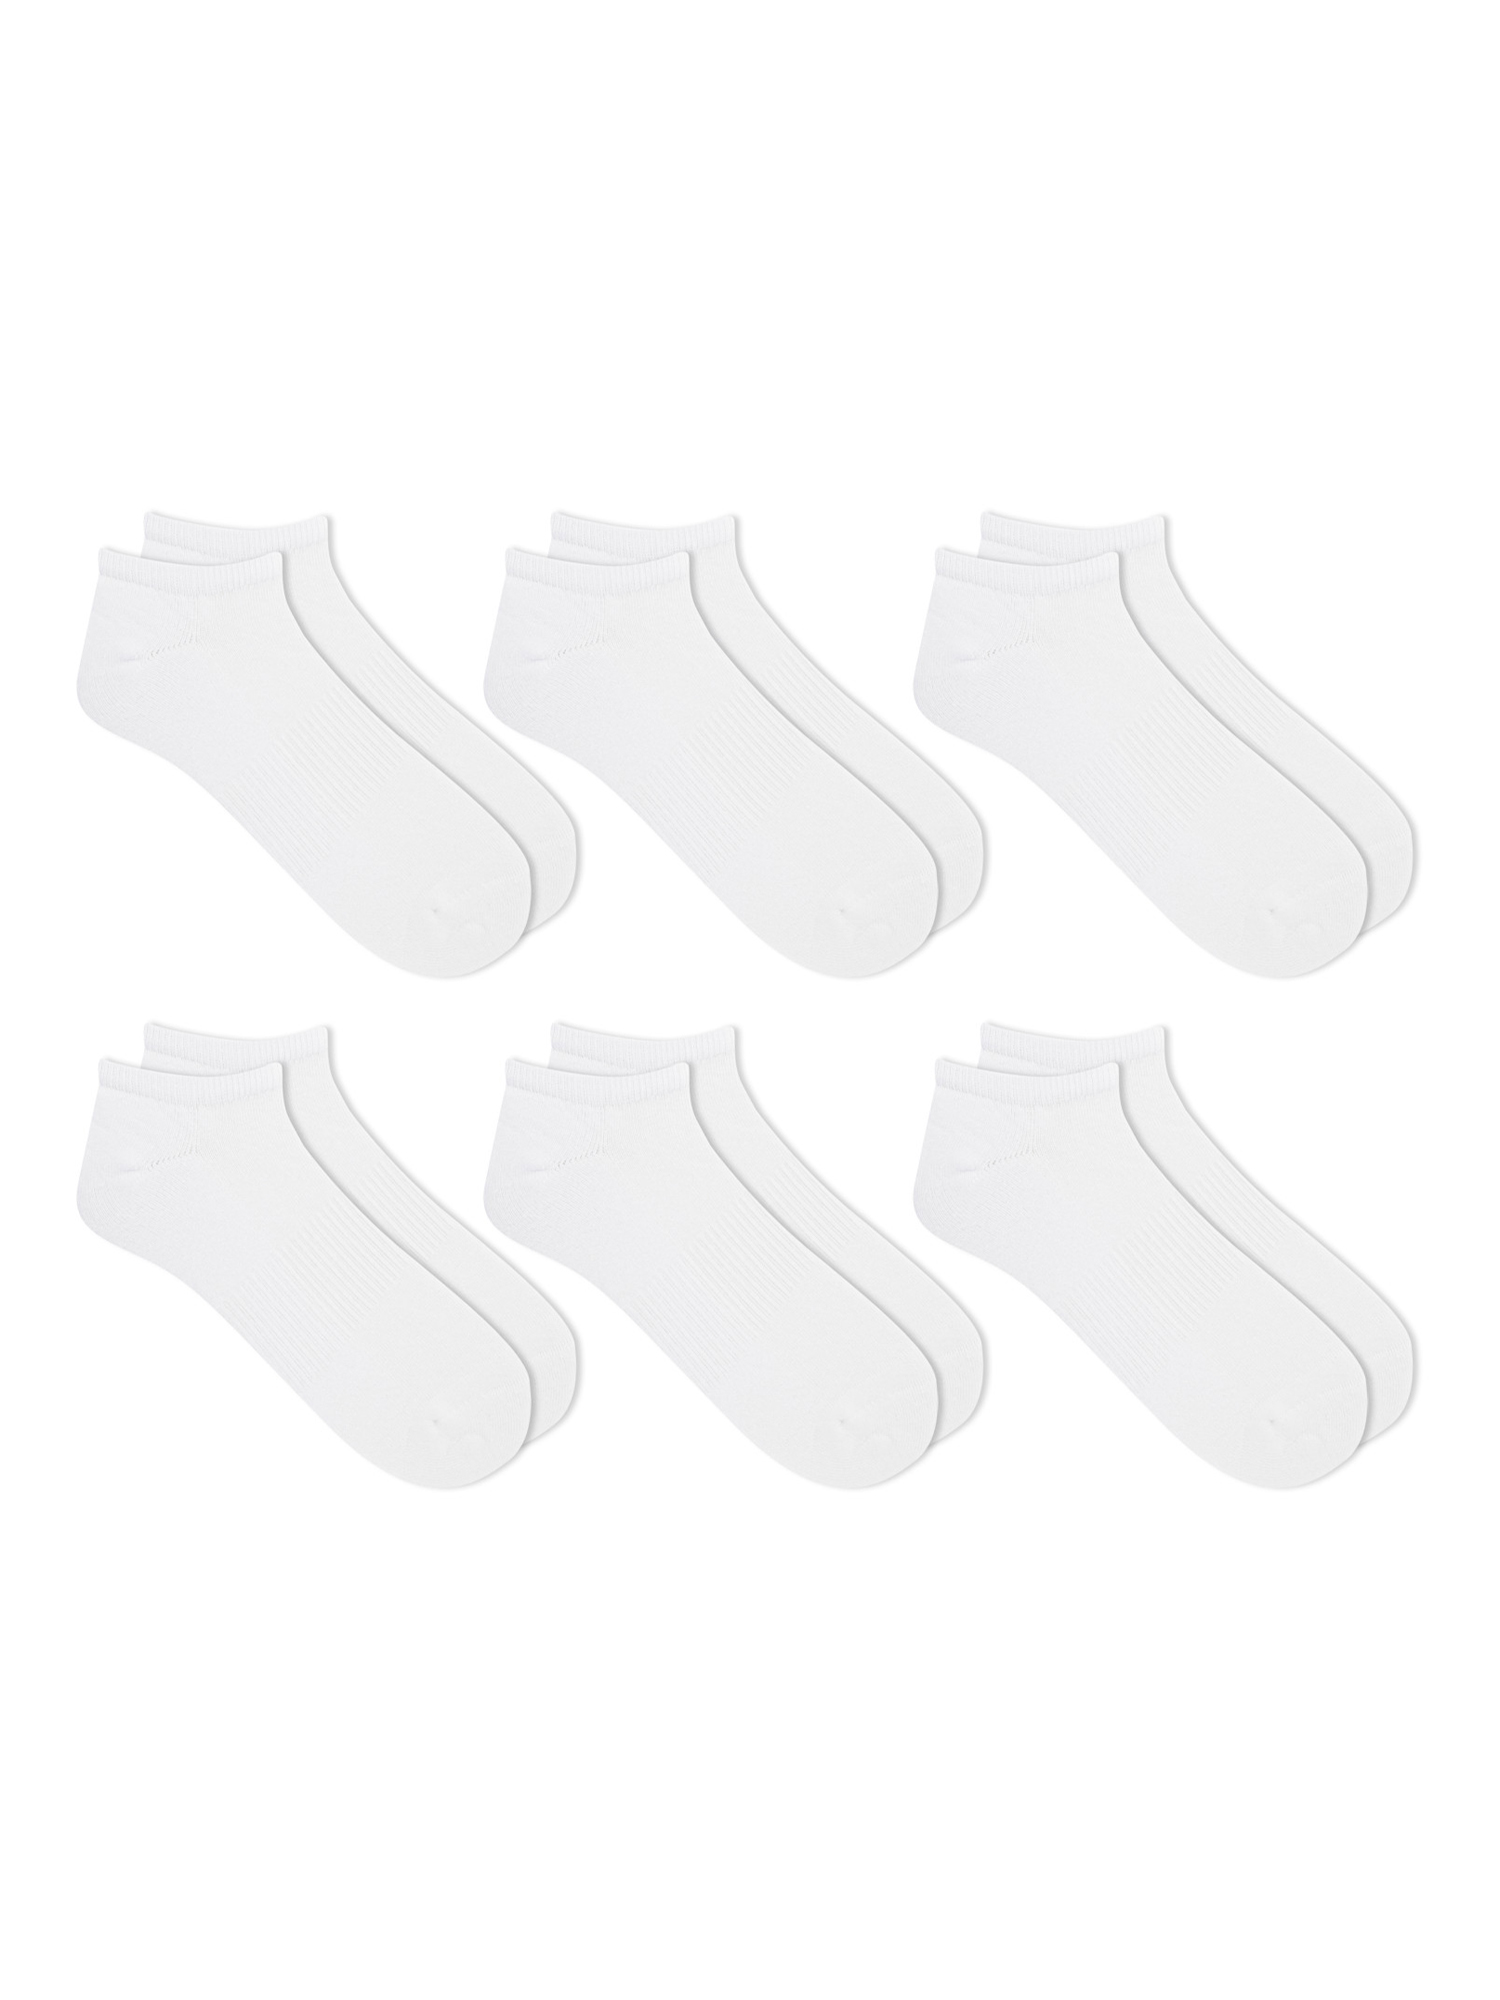 Find Your Perfect Athletic Works Men's No Show Socks. 6-Pack - Walmart.com